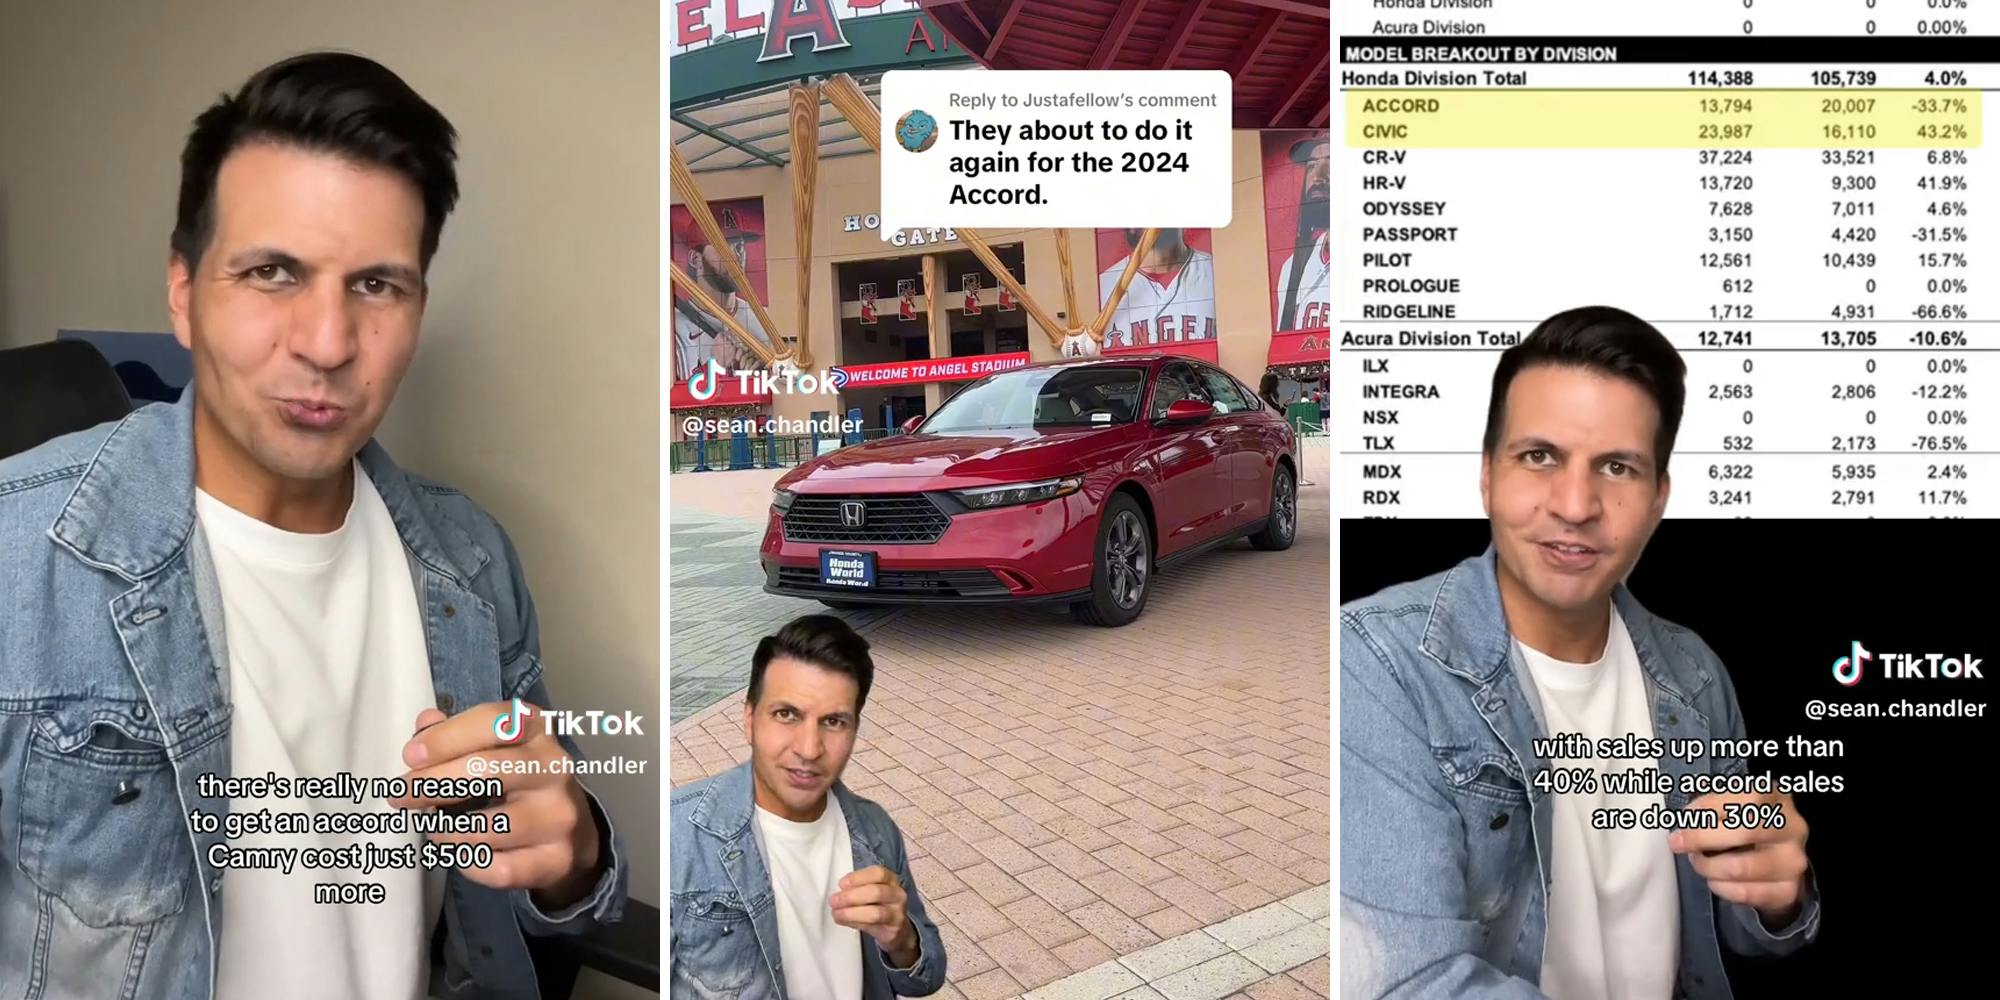 man with caption "there's really no reason to get an accord when a camry cost just $500 more" (l) honda accord with caption "they about to do it again for the 2024 accord" (c) man with sales figure chart in background, caption "with sales up more than 40% while accord sales are down 30%" (r)